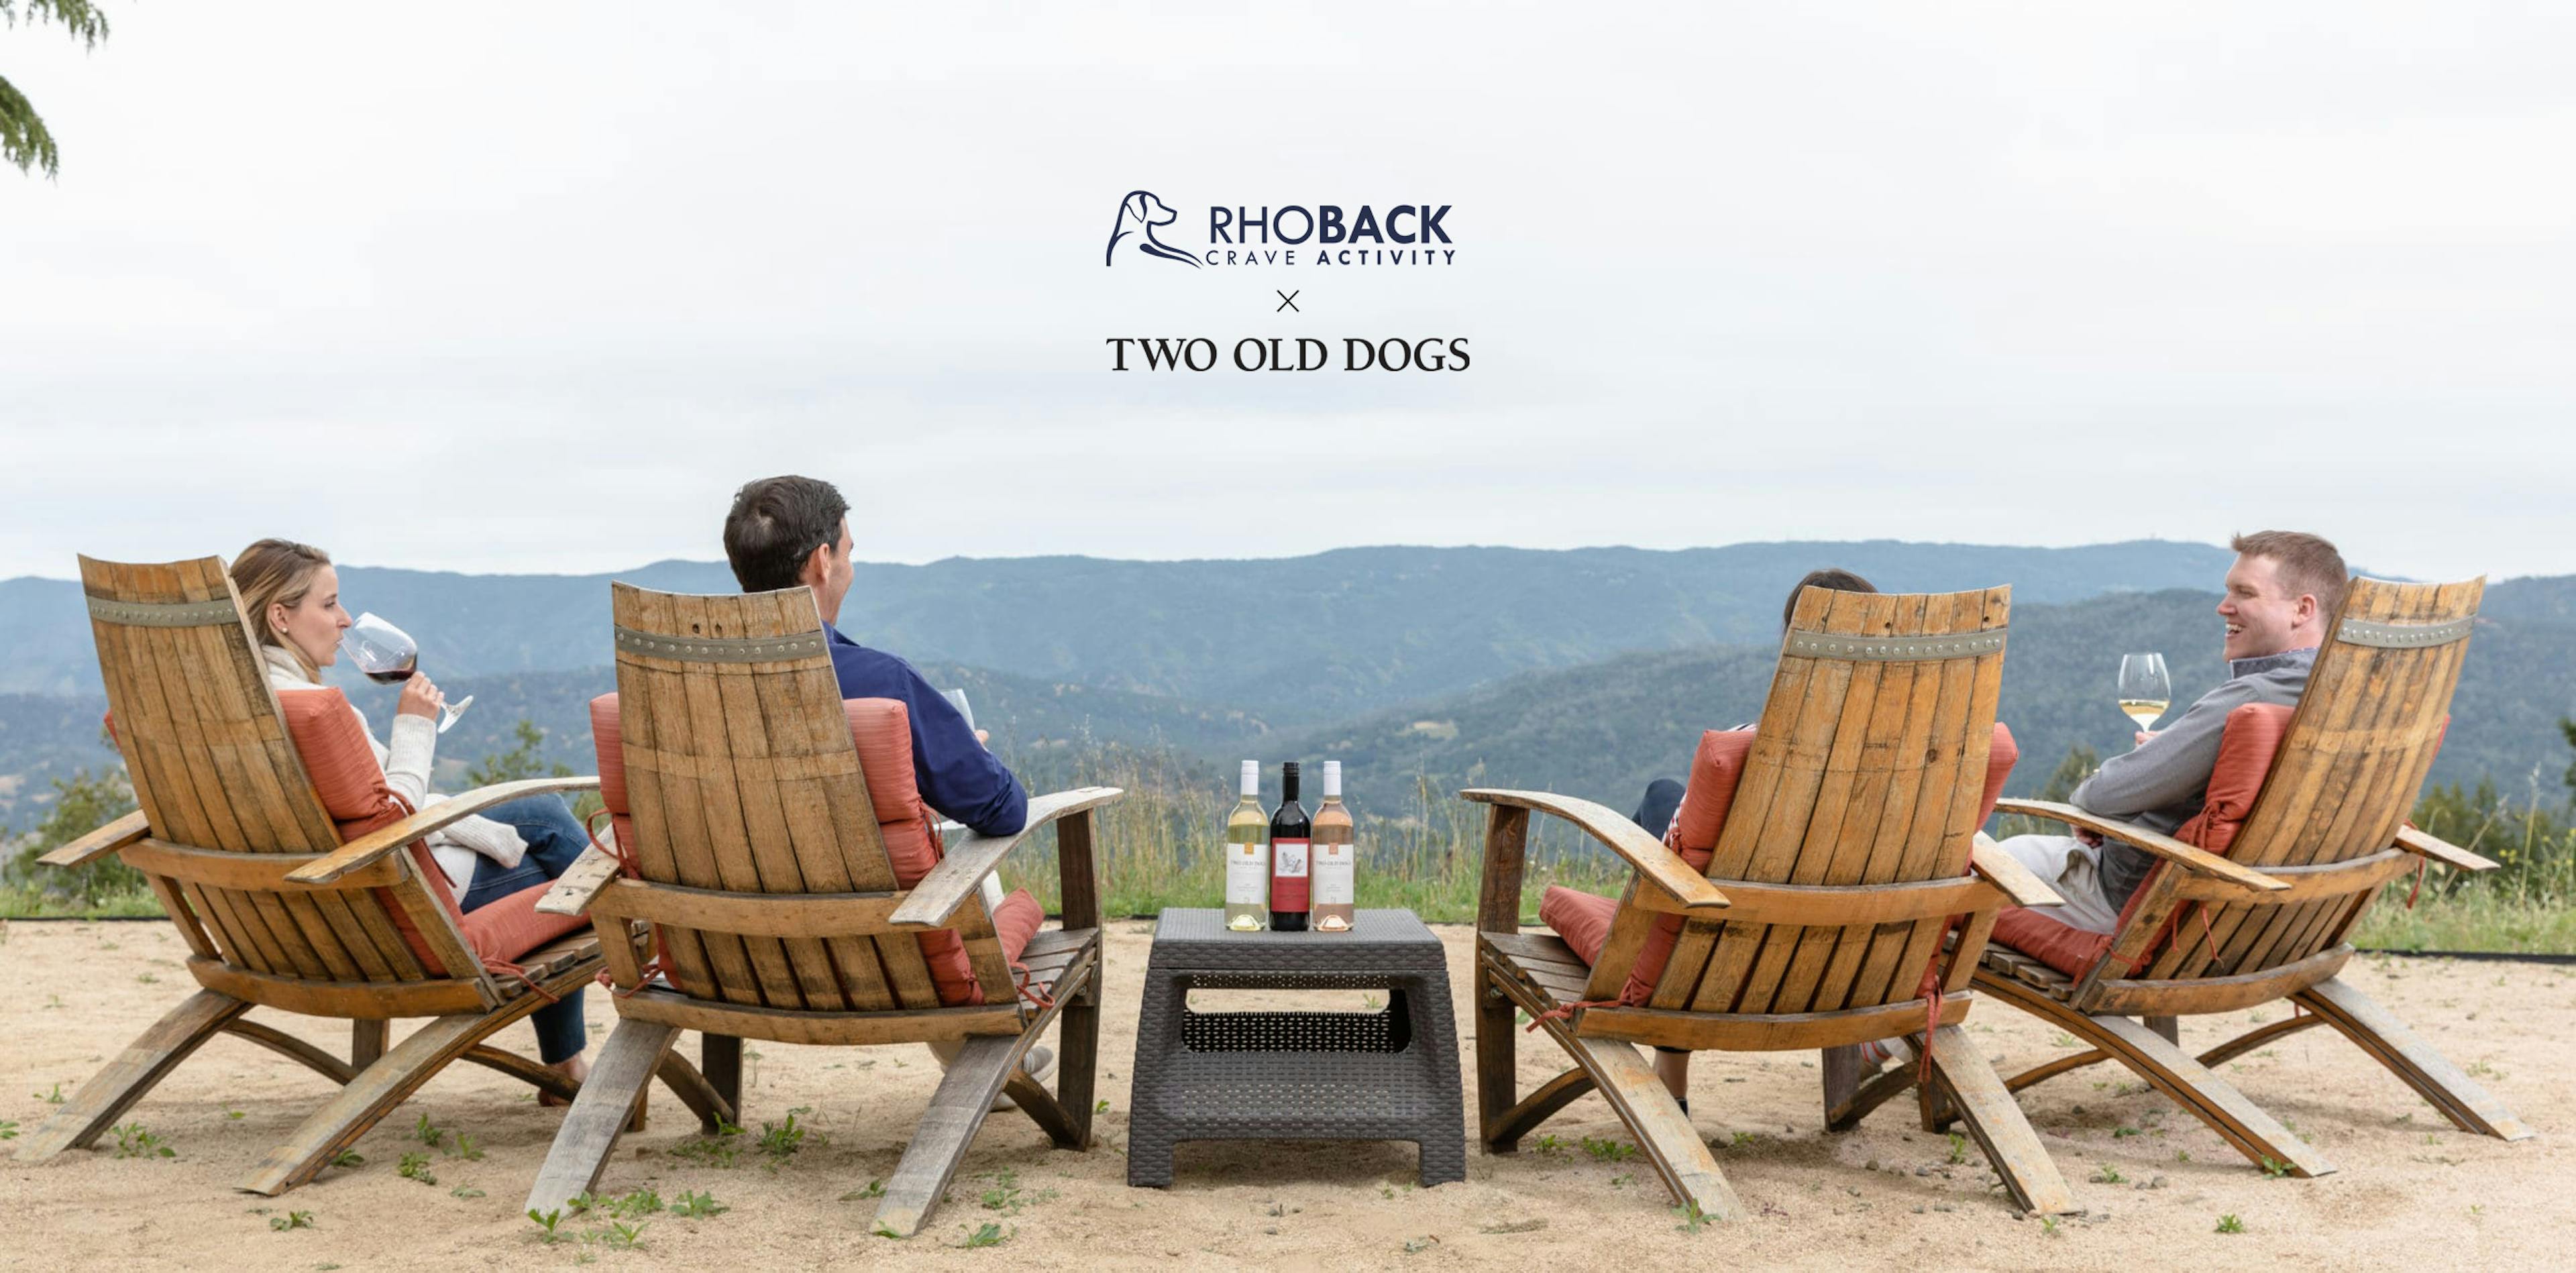 Two Old Dogs x Rhoback collaboration cover photo with collaboration logo